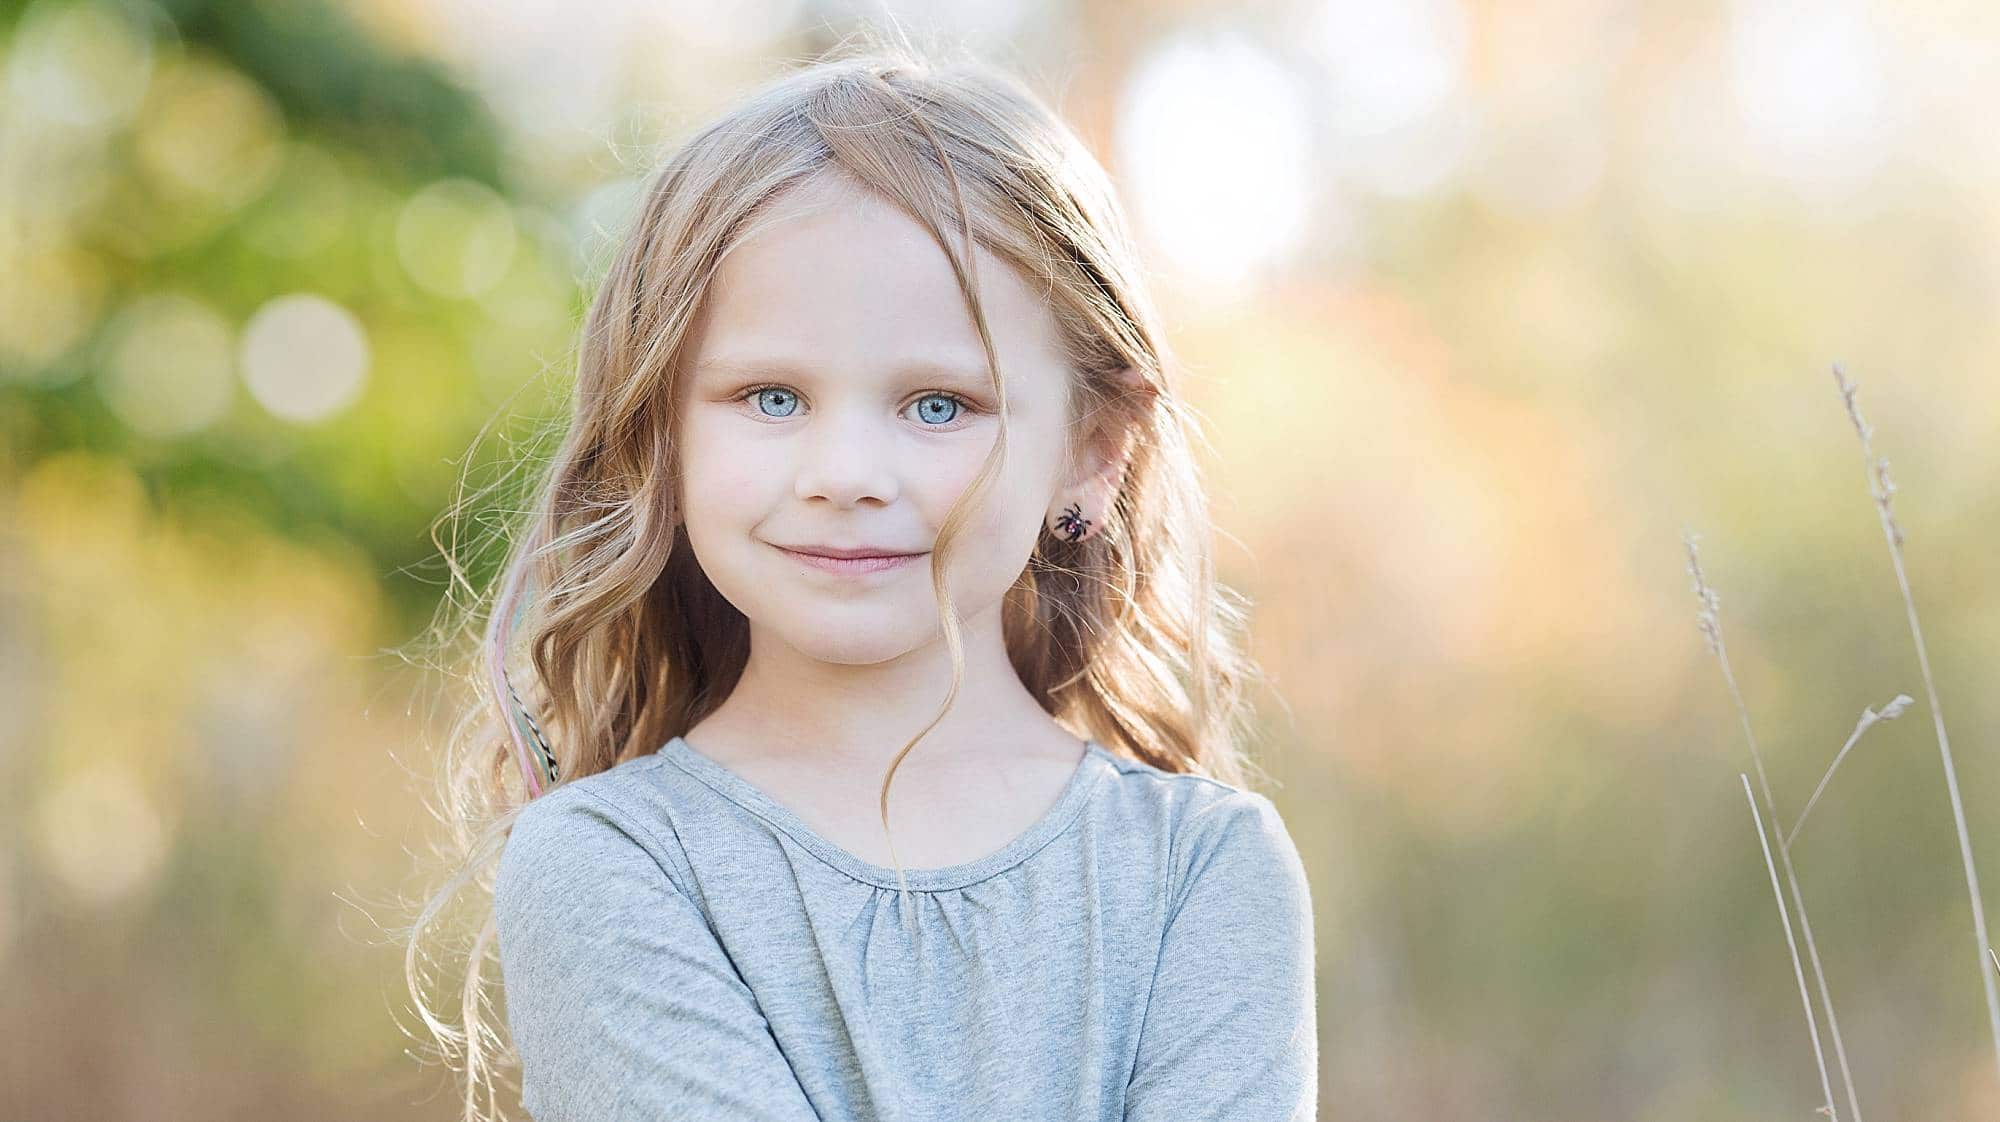 closeup image of a little girl with blond wavy hair and bright blue eyes